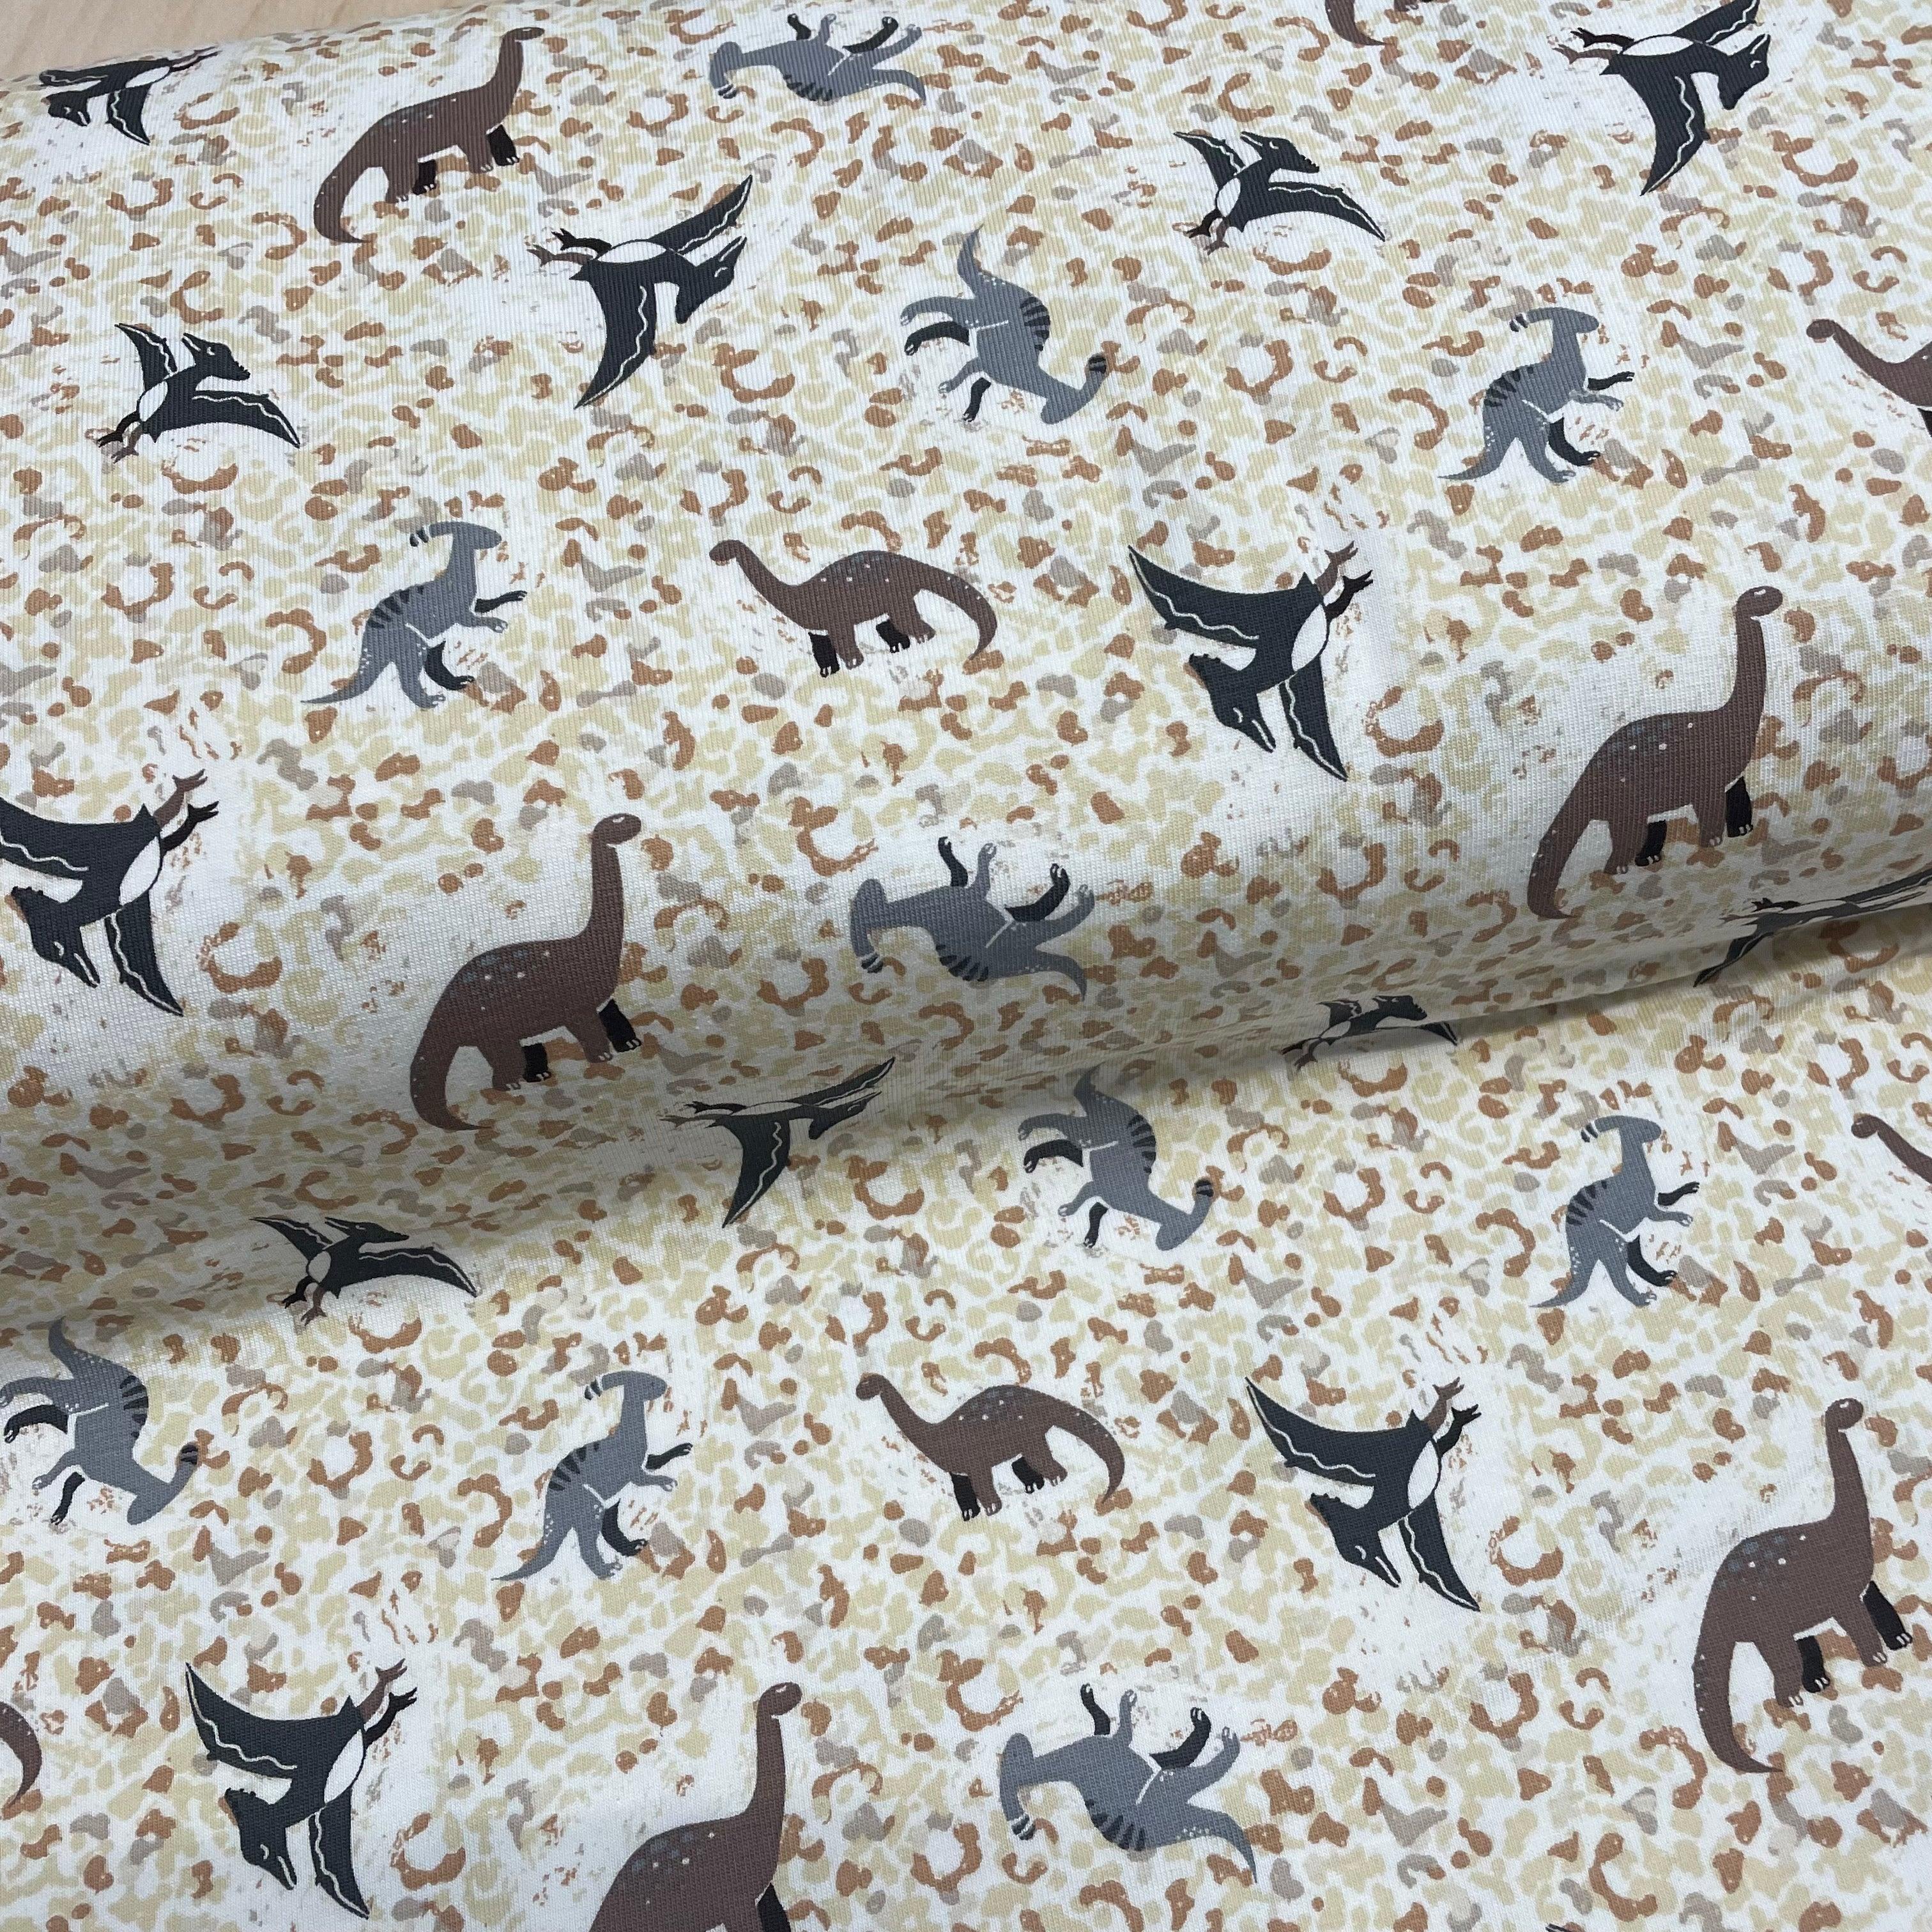 Small Dinosaurs on Sand texture Cotton Jersey Fabric